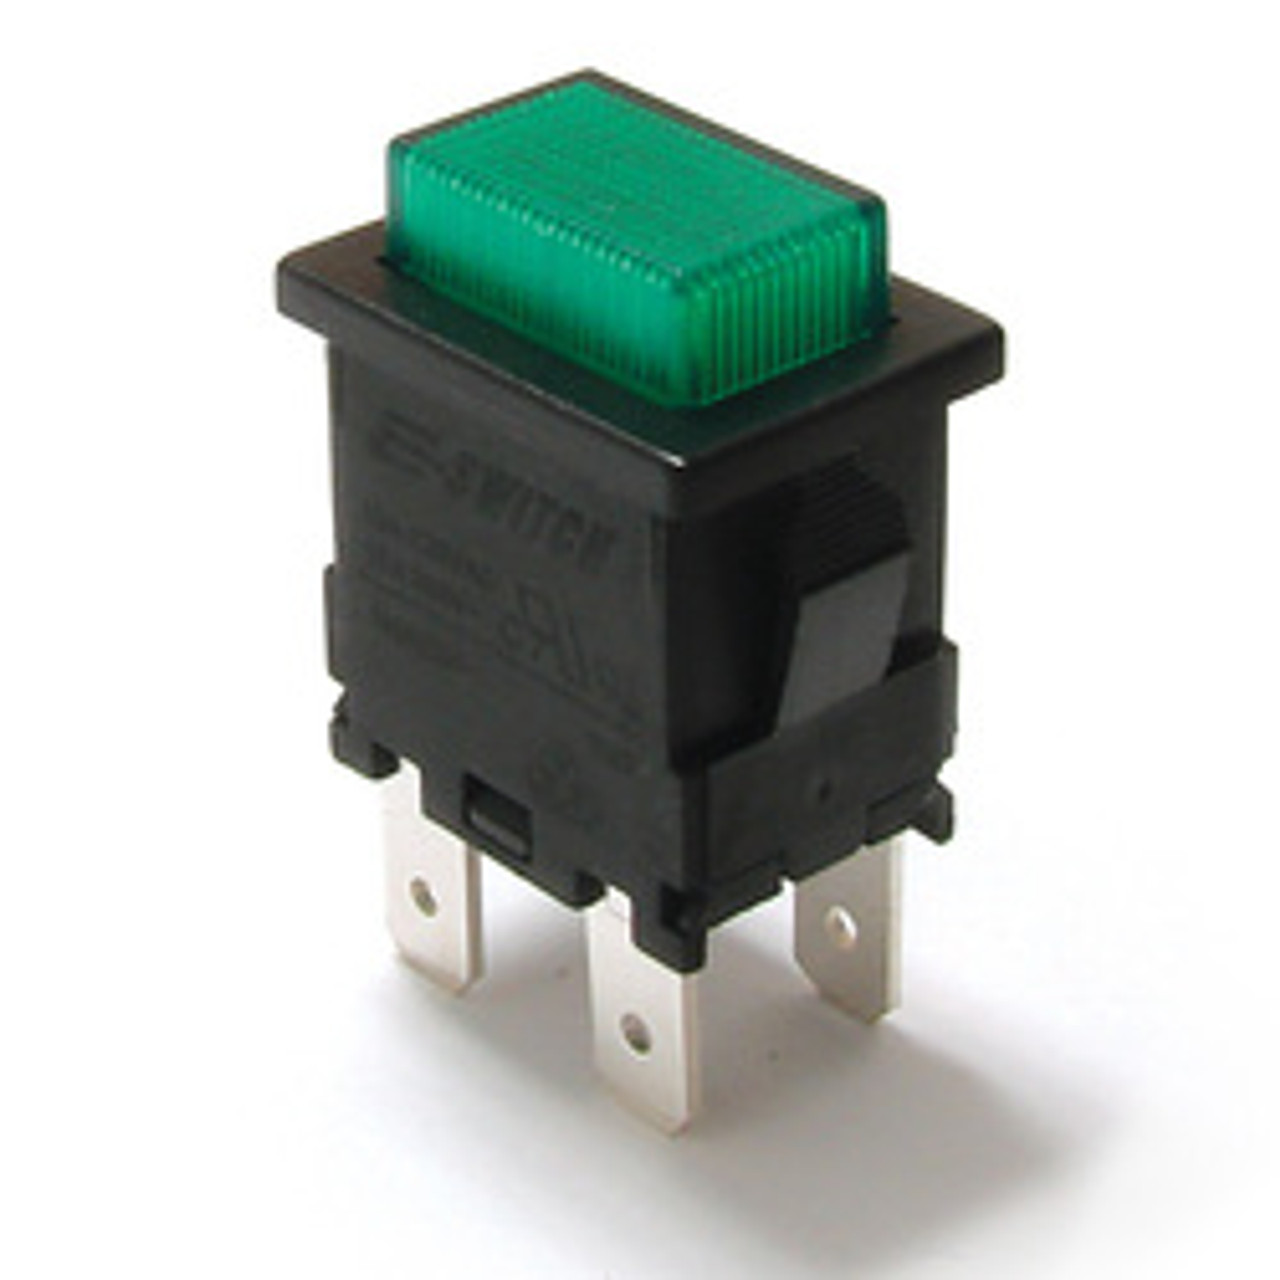 E-Switch PB1973EBLKBLKEF0 Pushbutton Switches